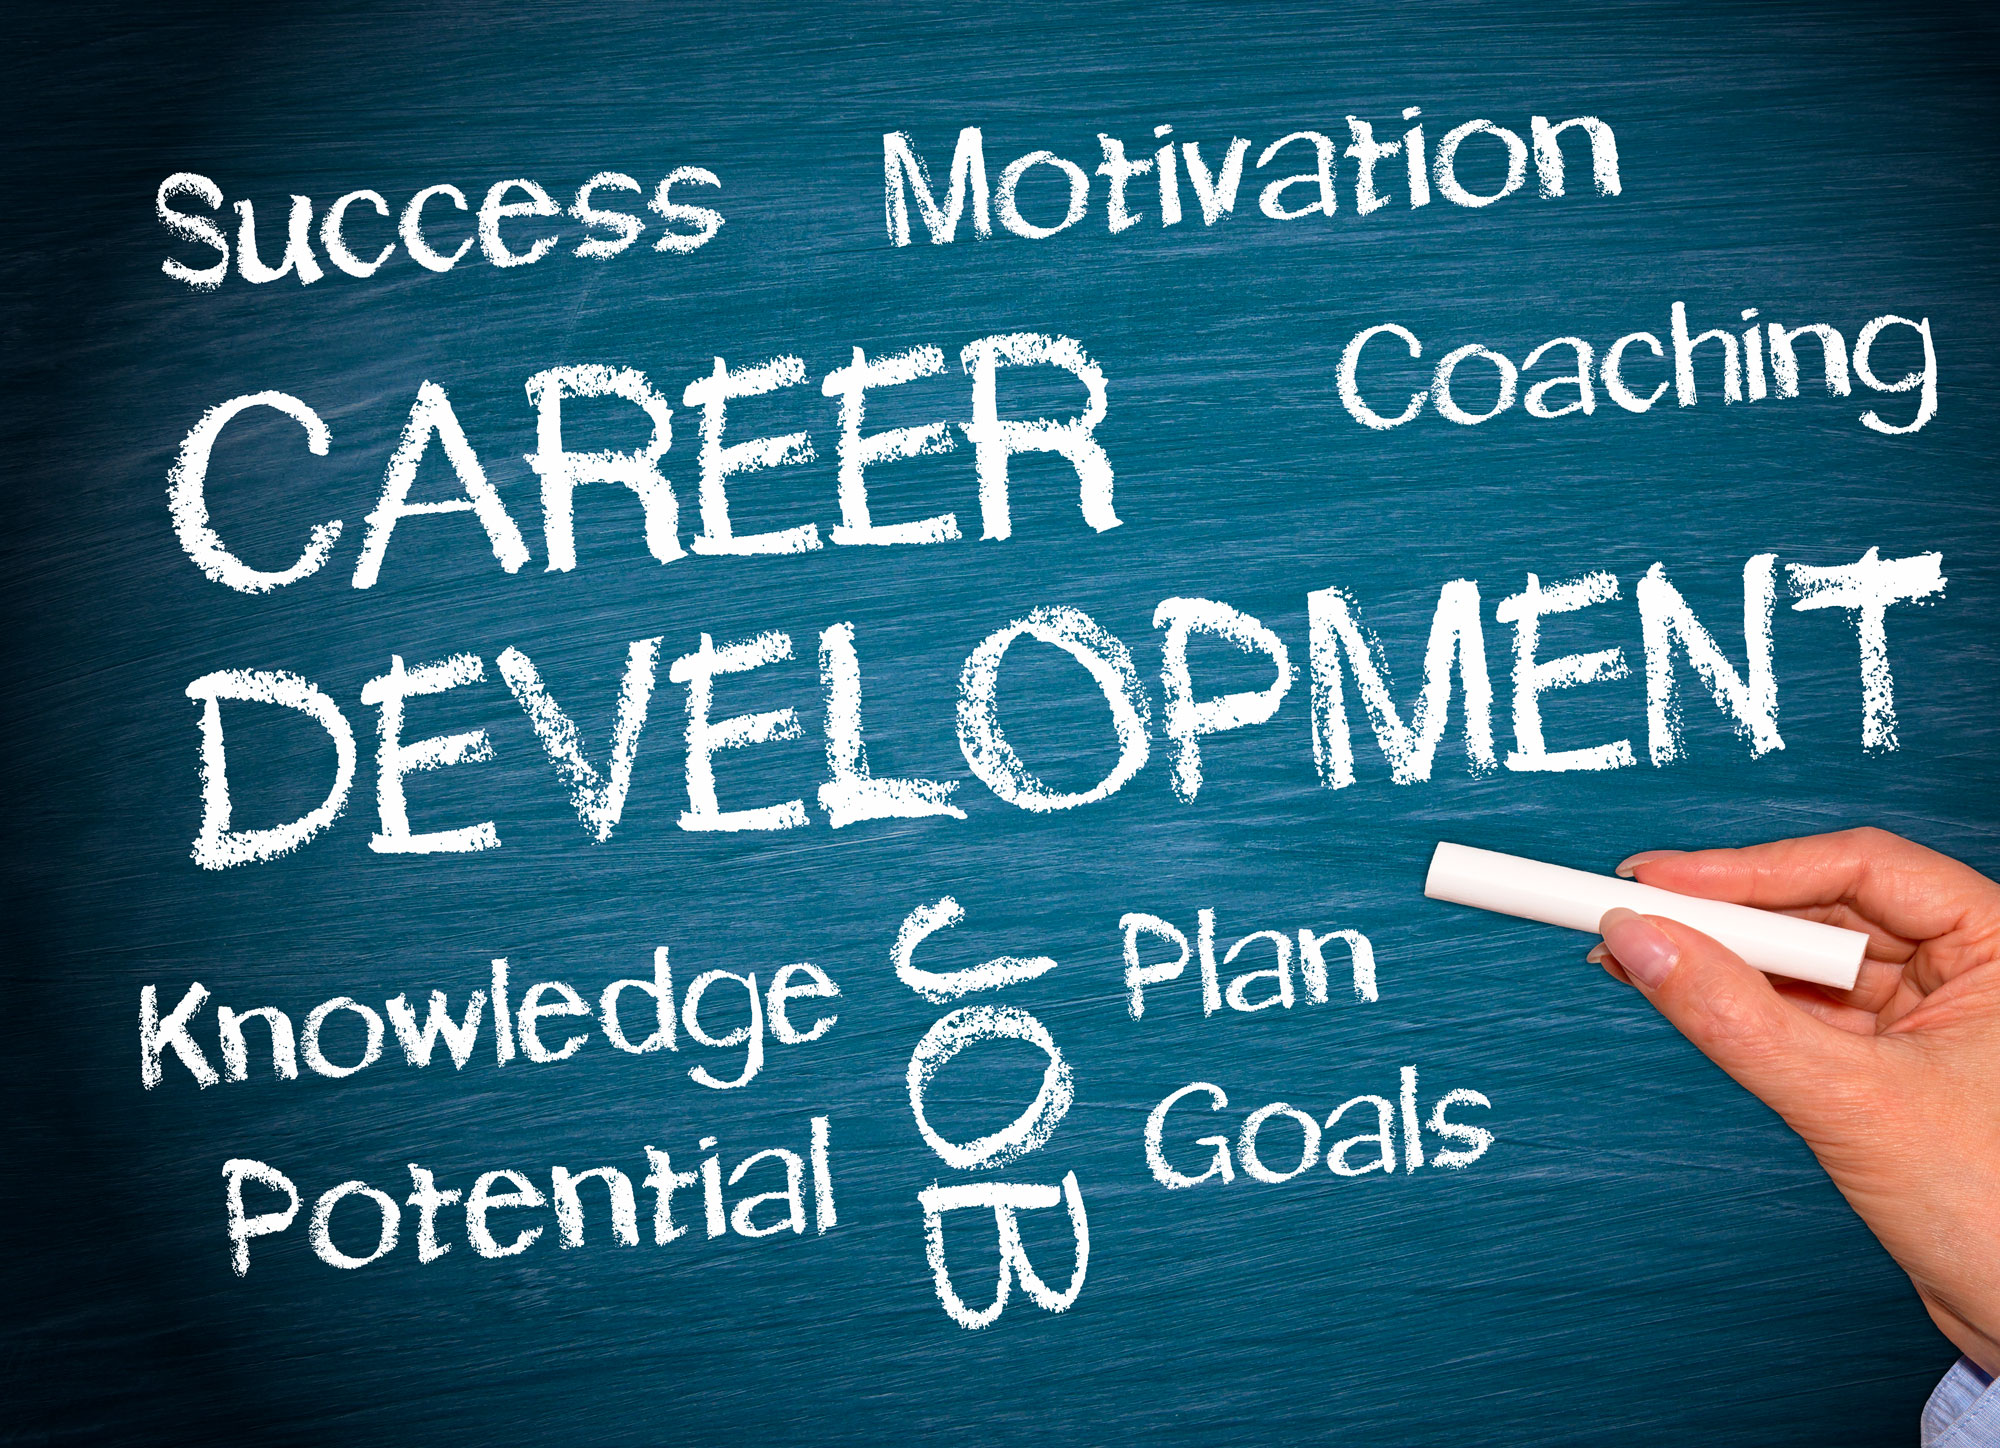 Contact a career coach in Austin